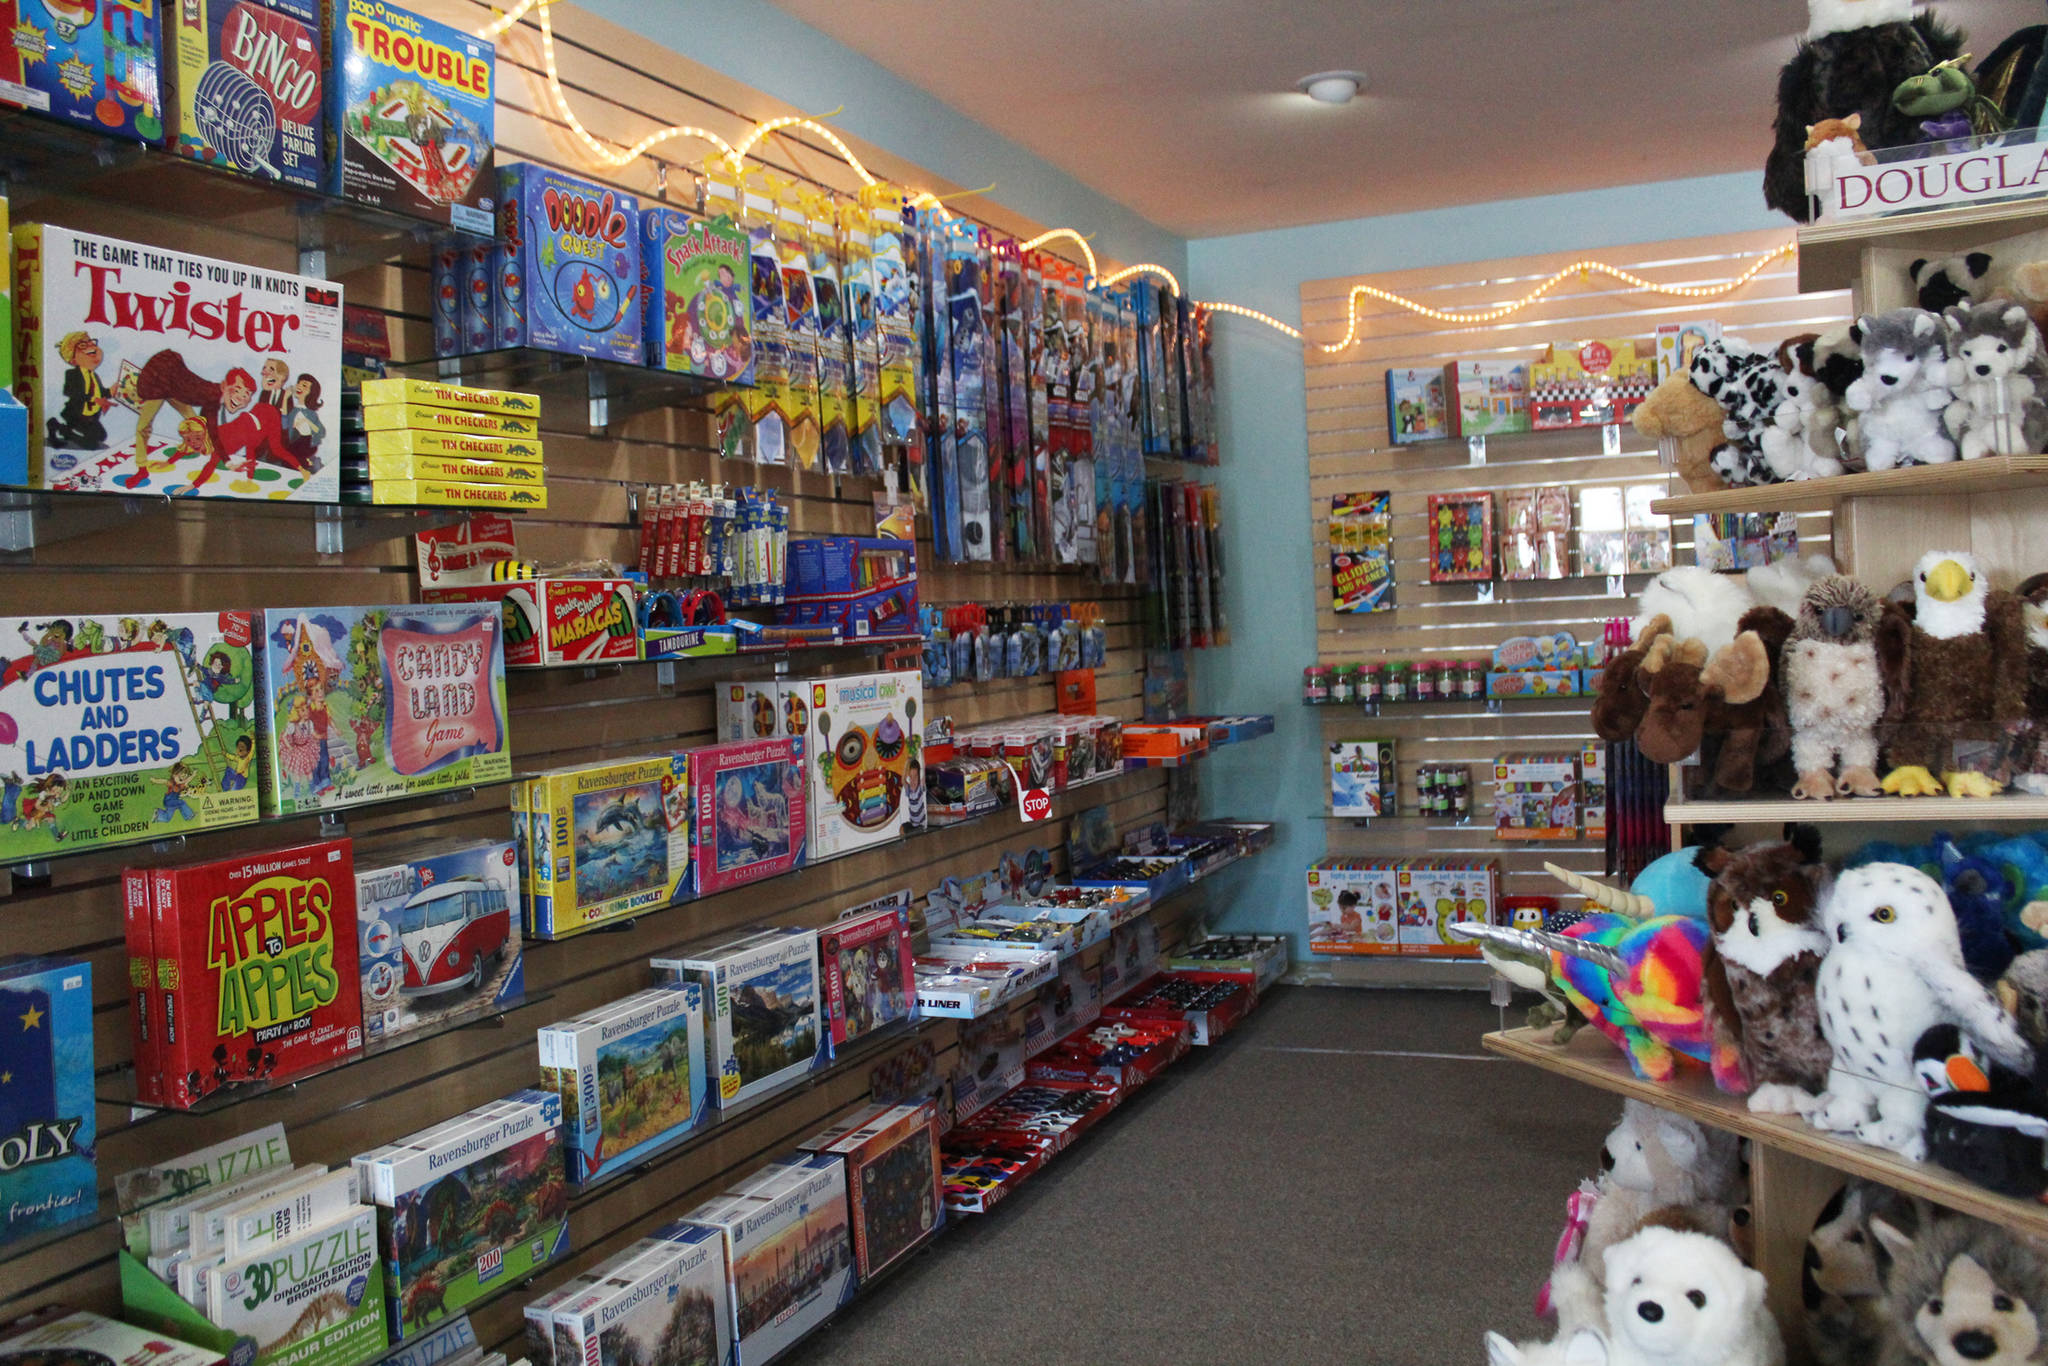 The inside of Captain’s Toy Chest, a new toy store shown here Thursday, June 7, 2018 in Homer, Alaska, brims with amusing and educational toys for kids. (Photo by Megan Pacer/Homer News)